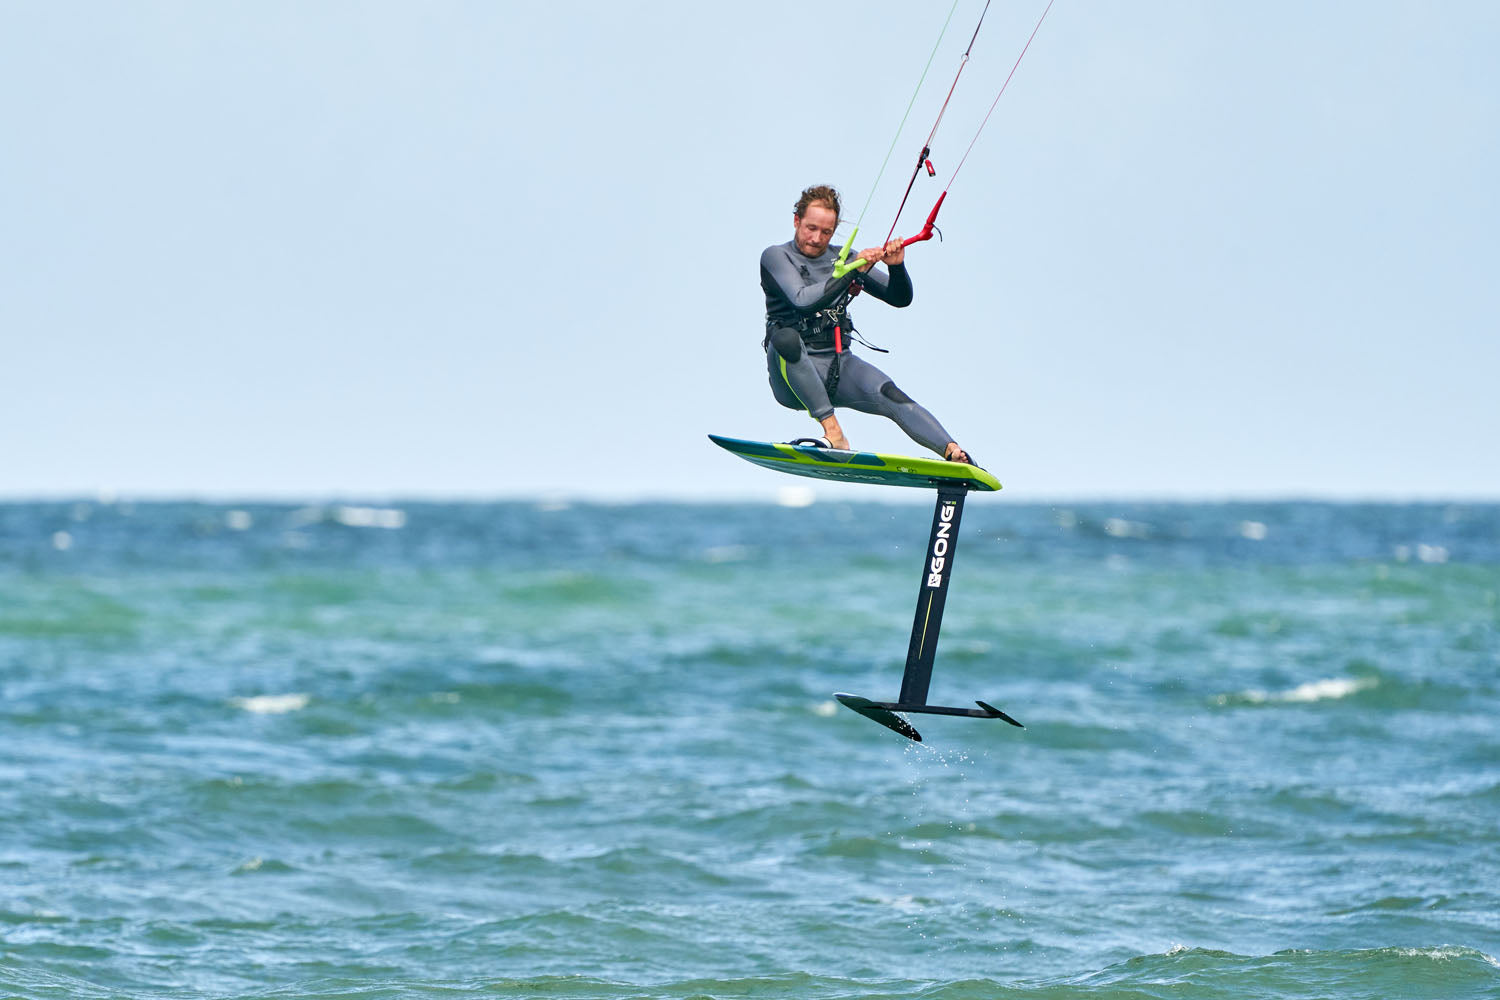 GEAR: THE EXTREMELY MANOEUVRABLE KITE FOIL